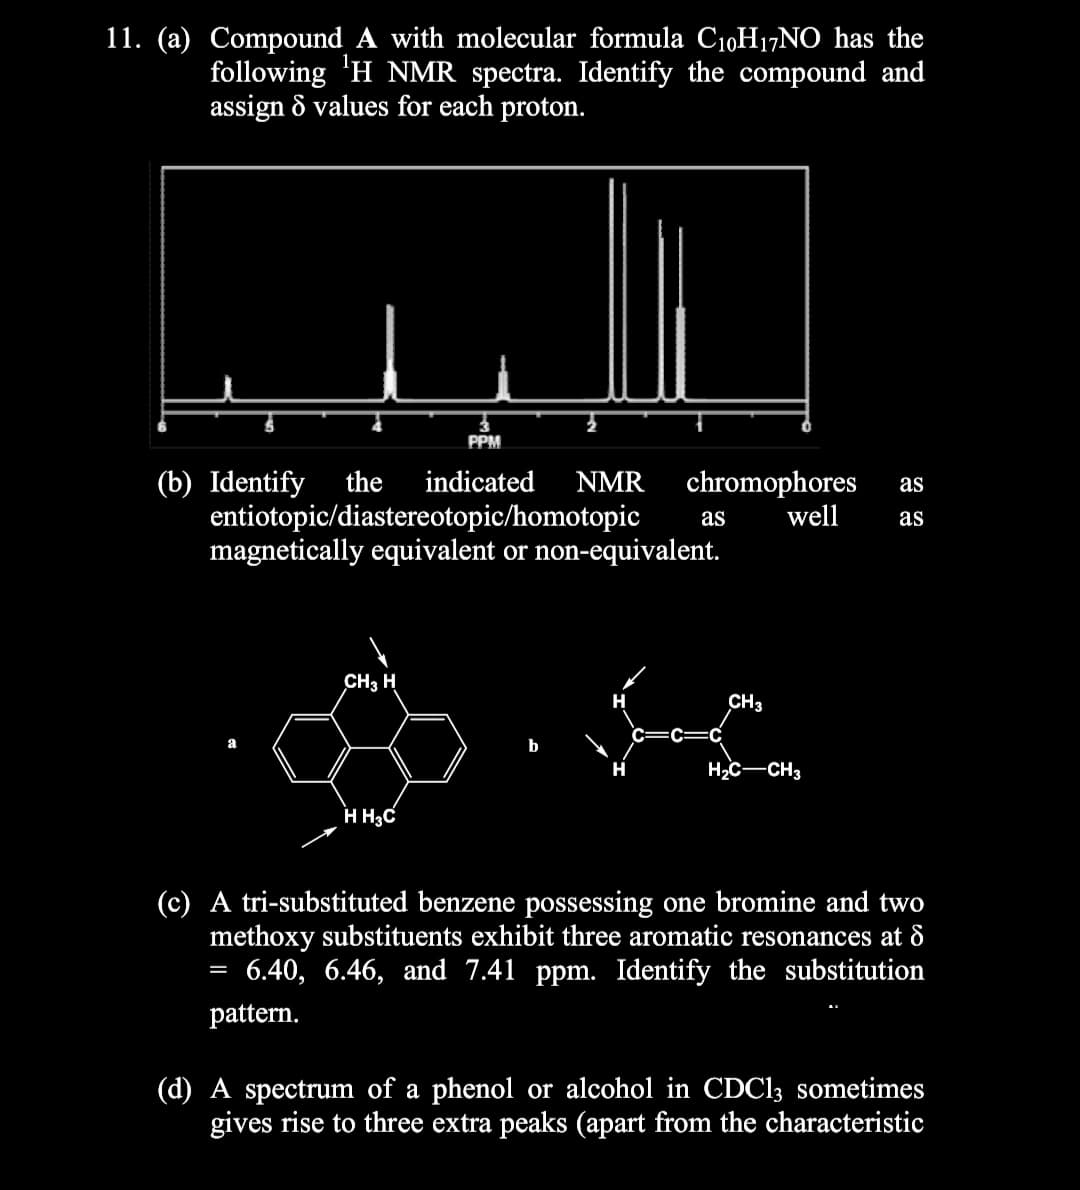 11. (a) Compound A with molecular formula C10H17NO has the
following 'H NMR spectra. Identify the compound and
assign & values for each proton.
PPM
(b) Identify
entiotopic/diastereotopic/homotopic
magnetically equivalent or non-equivalent.
the
indicated
NMR
chromophores
well
as
as
as
CH3 H
CH3
H2c-CH3
H H3C
(c) A tri-substituted benzene possessing one bromine and two
methoxy substituents exhibit three aromatic resonances at 8
6.40, 6.46, and 7.41 ppm. Identify the substitution
pattern.
(d) A spectrum of a phenol or alcohol in CDC13 sometimes
gives rise to three extra peaks (apart from the characteristic
